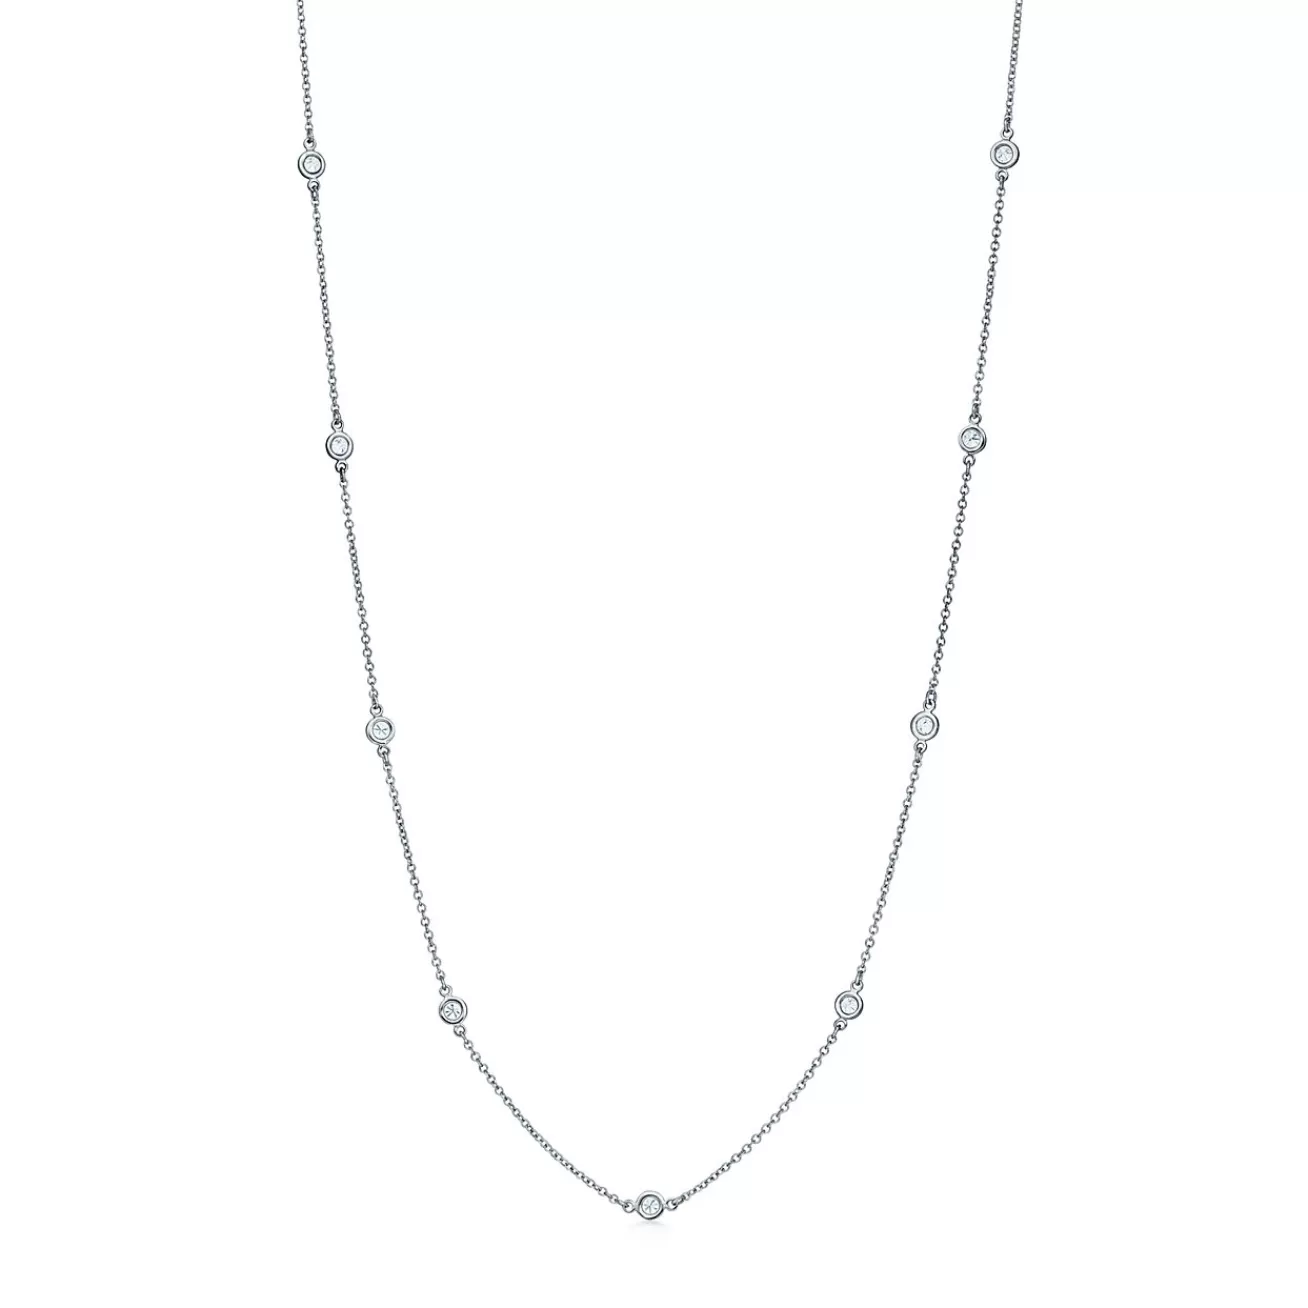 Tiffany & Co. Elsa Peretti® Diamonds by the Yard® necklace in platinum. | ^ Necklaces & Pendants | Gifts for Her